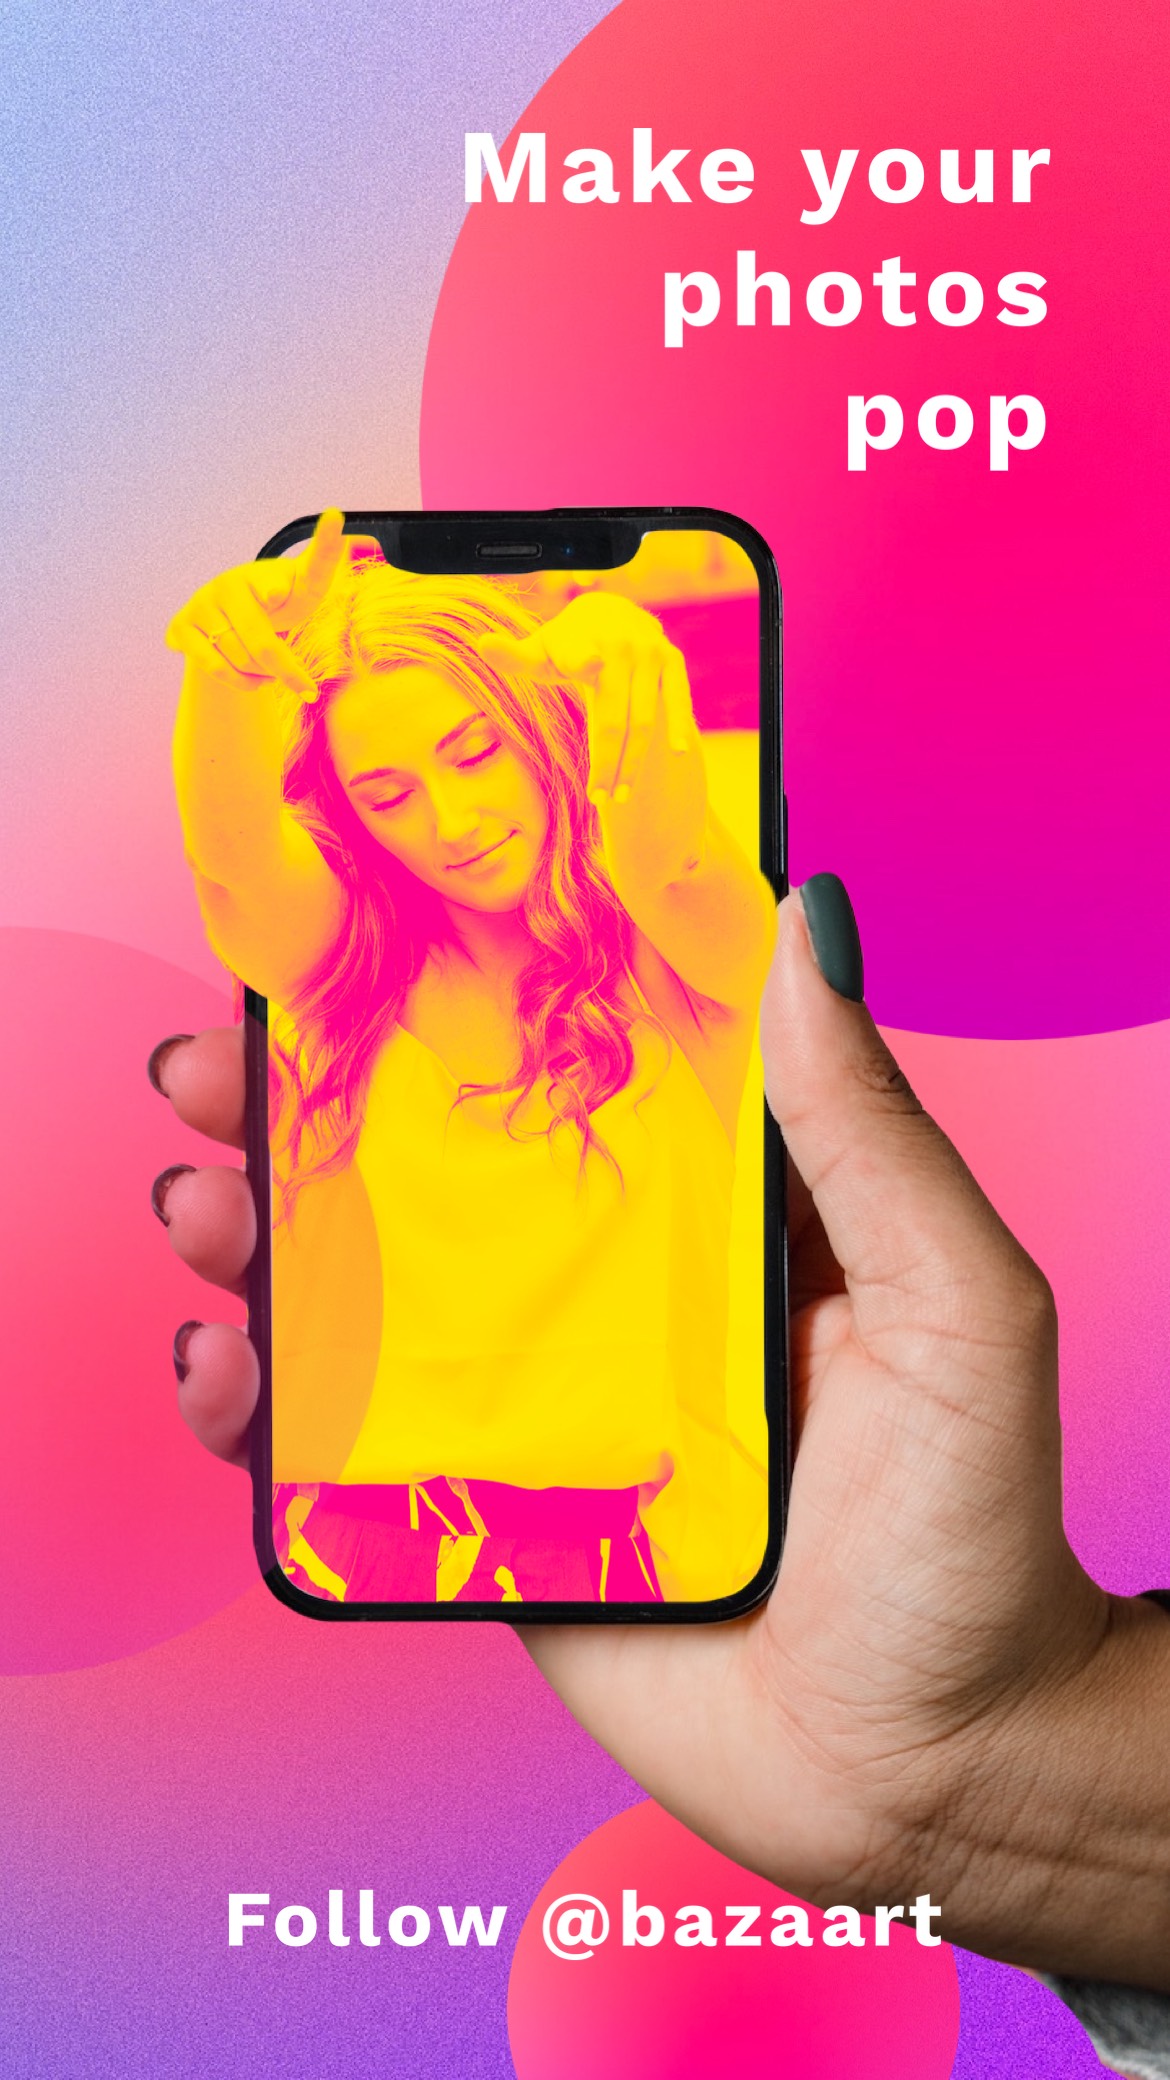 Make your photos pop gradients instagram story inspiration